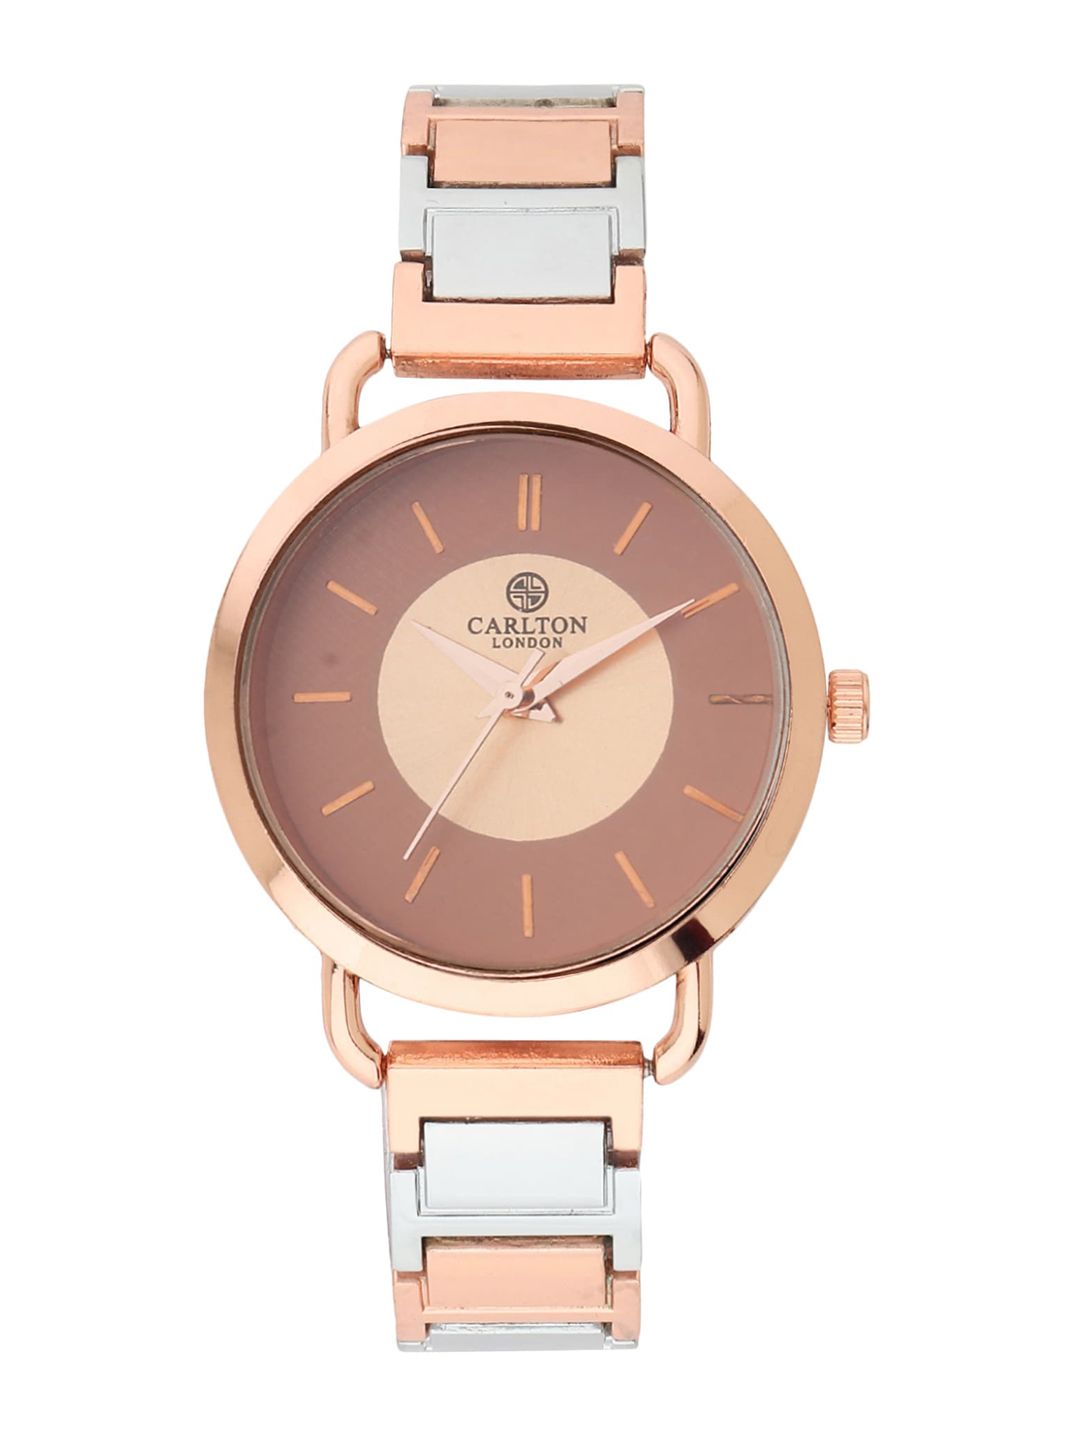 Carlton London Women Rose Gold-Toned Dial & Rose Gold Toned Stainless Steel Bracelet Style Straps Analogue Watch Price in India